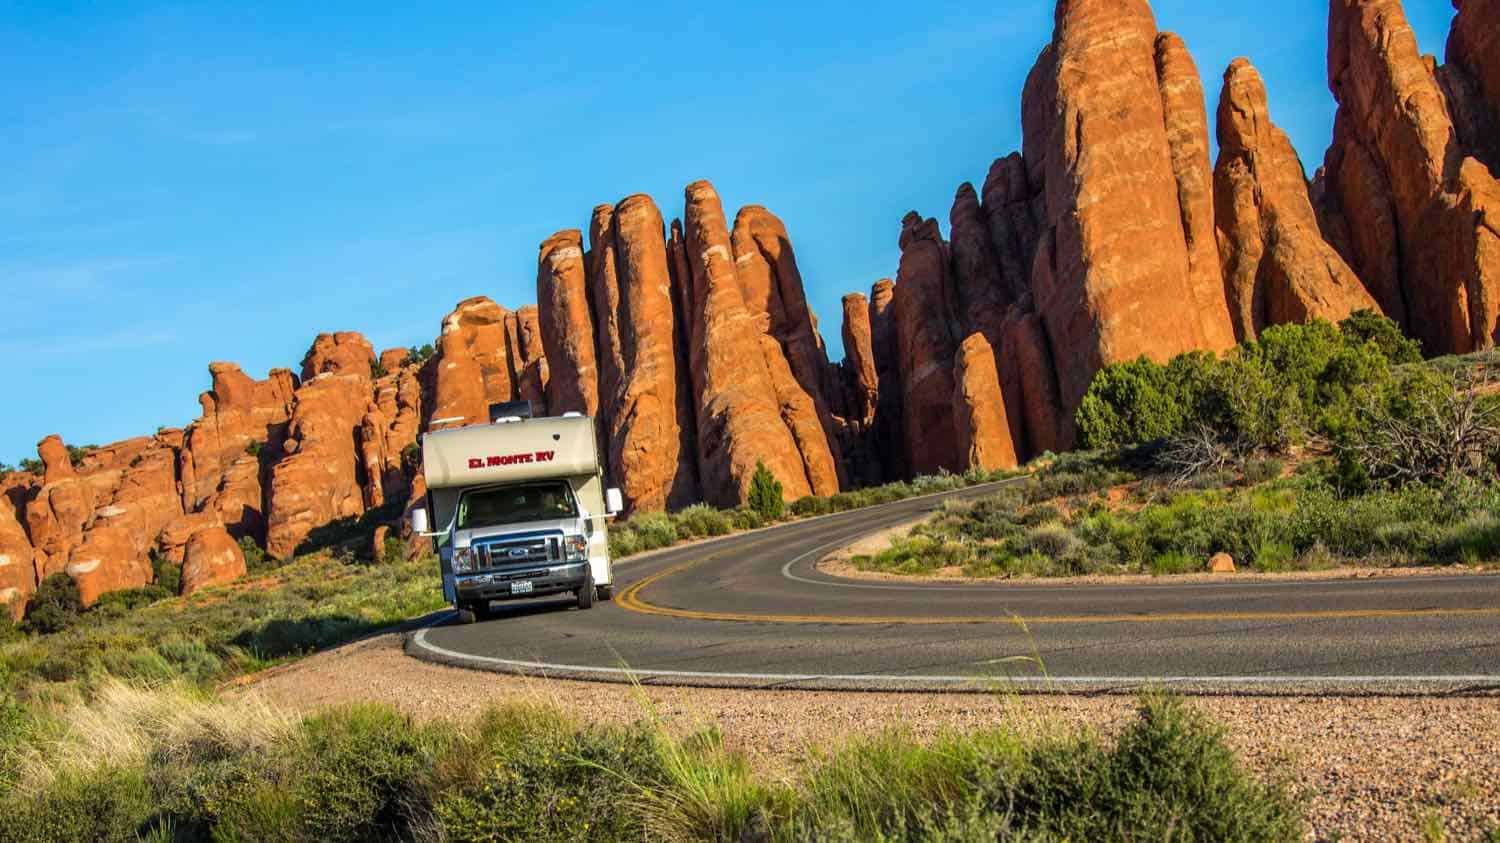 Camper traveling on a scenic road